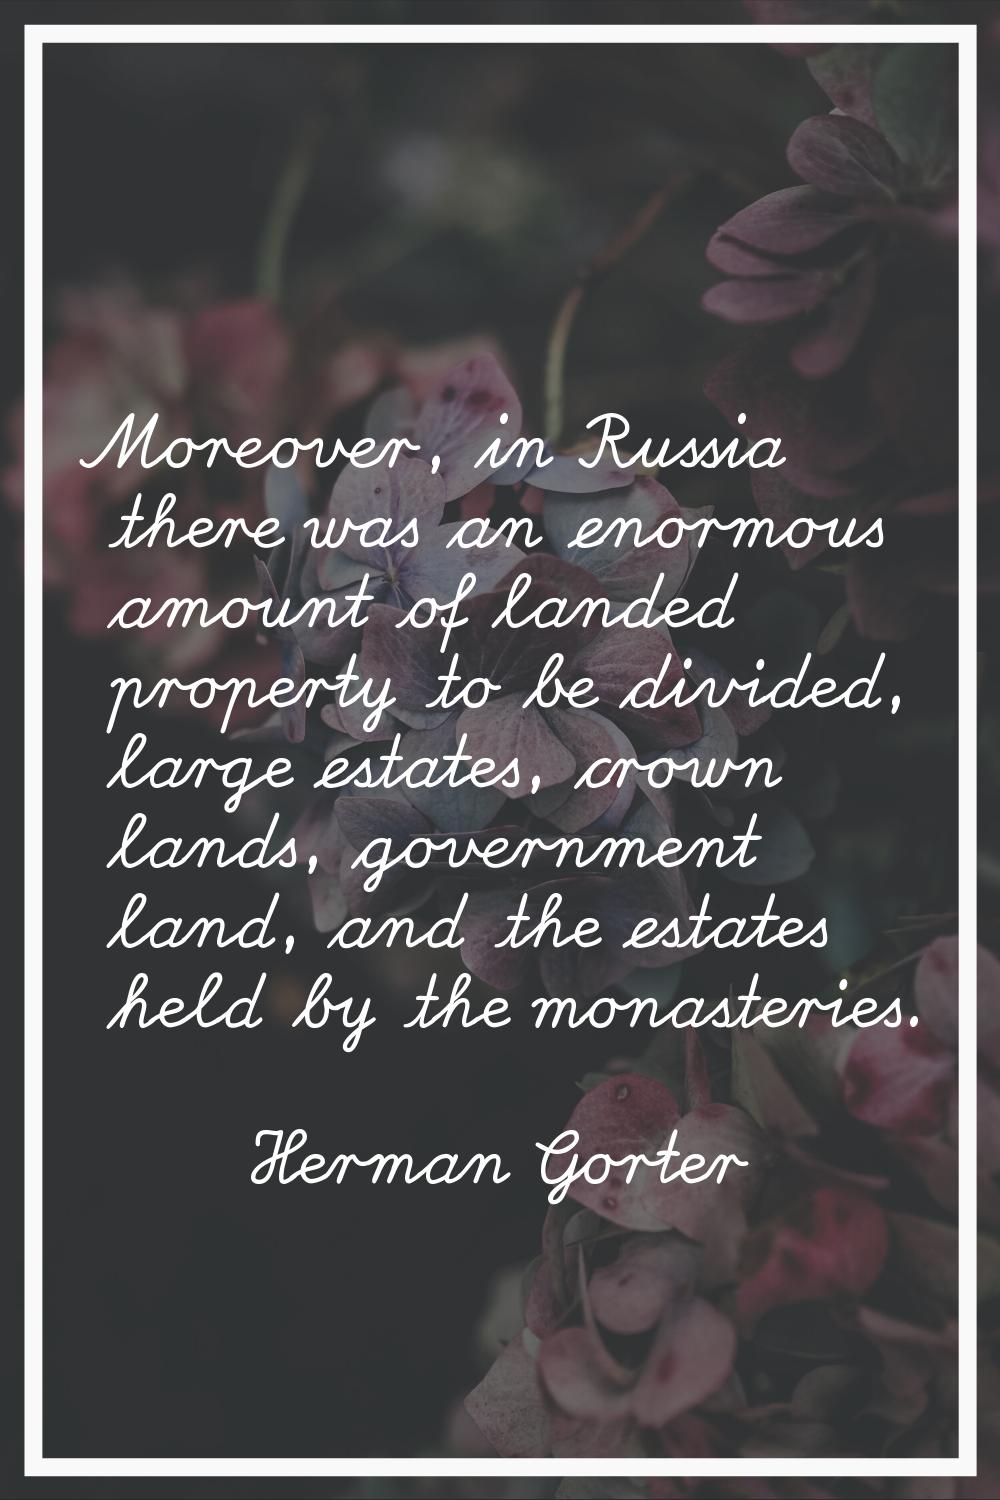 Moreover, in Russia there was an enormous amount of landed property to be divided, large estates, c